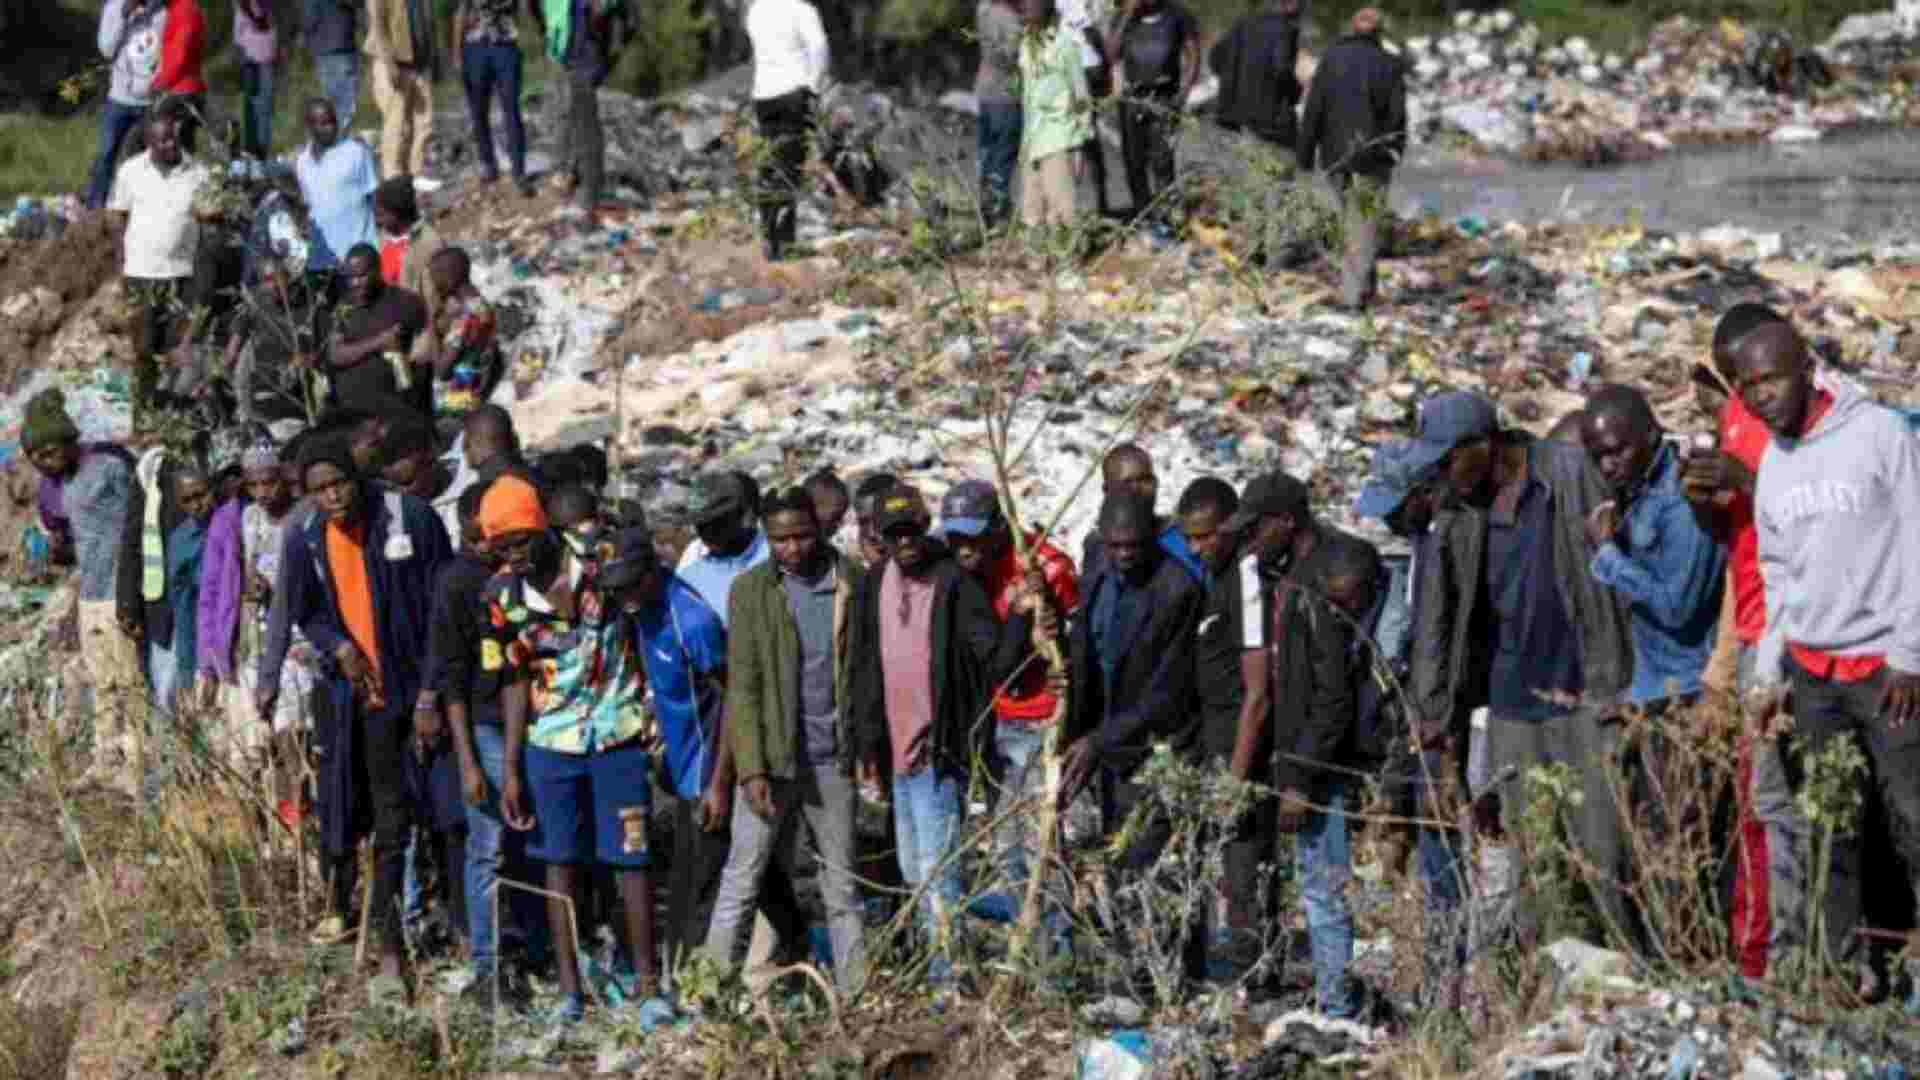 Dismembered Female Bodies Discovered At Nairobi Dump Site